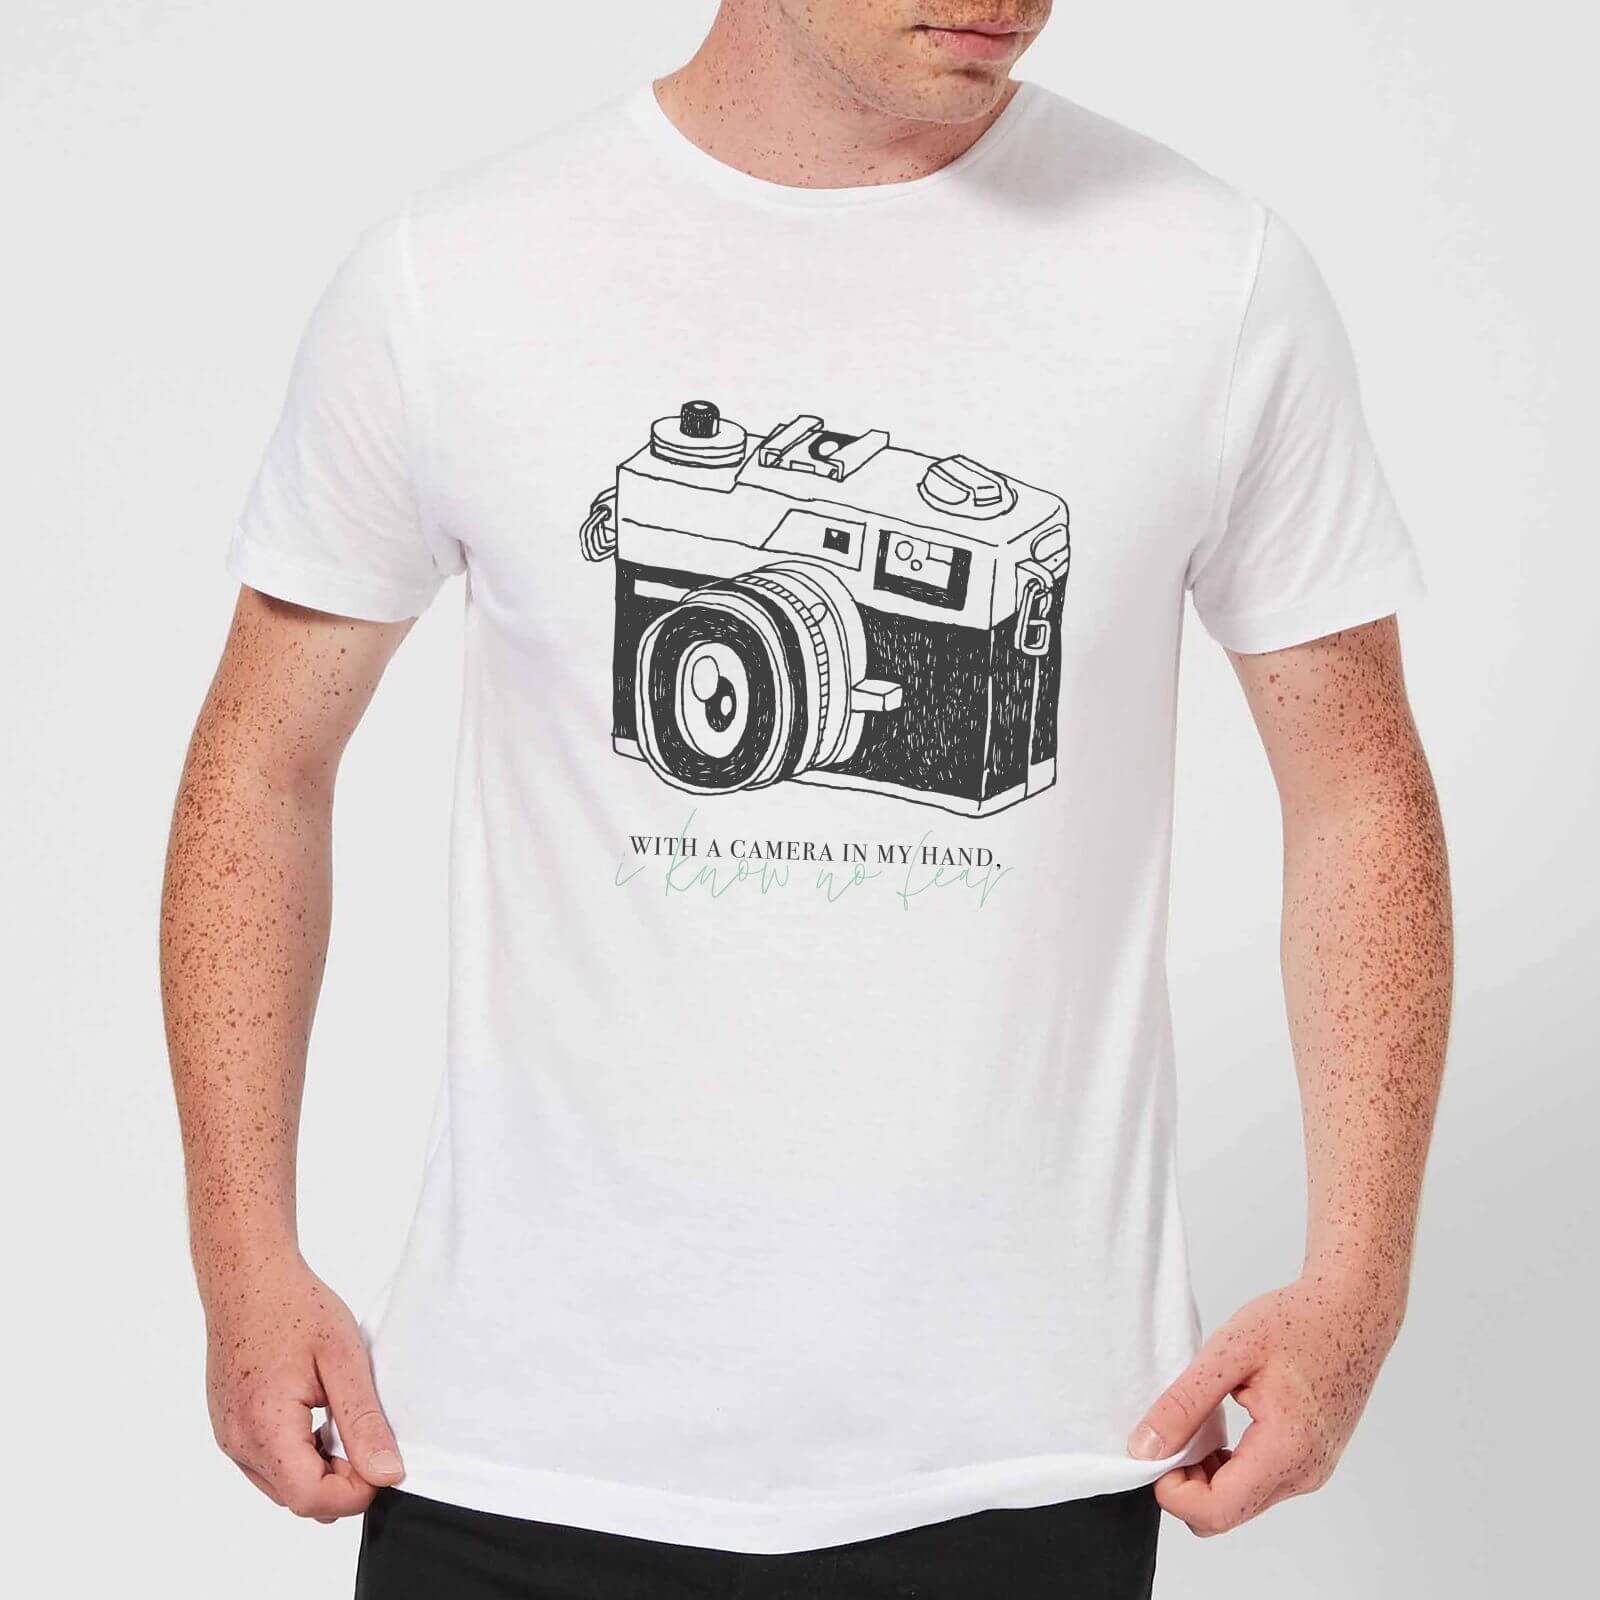 With A Camera In My Hand, I Know No Fear T-Shirt - White - M - White